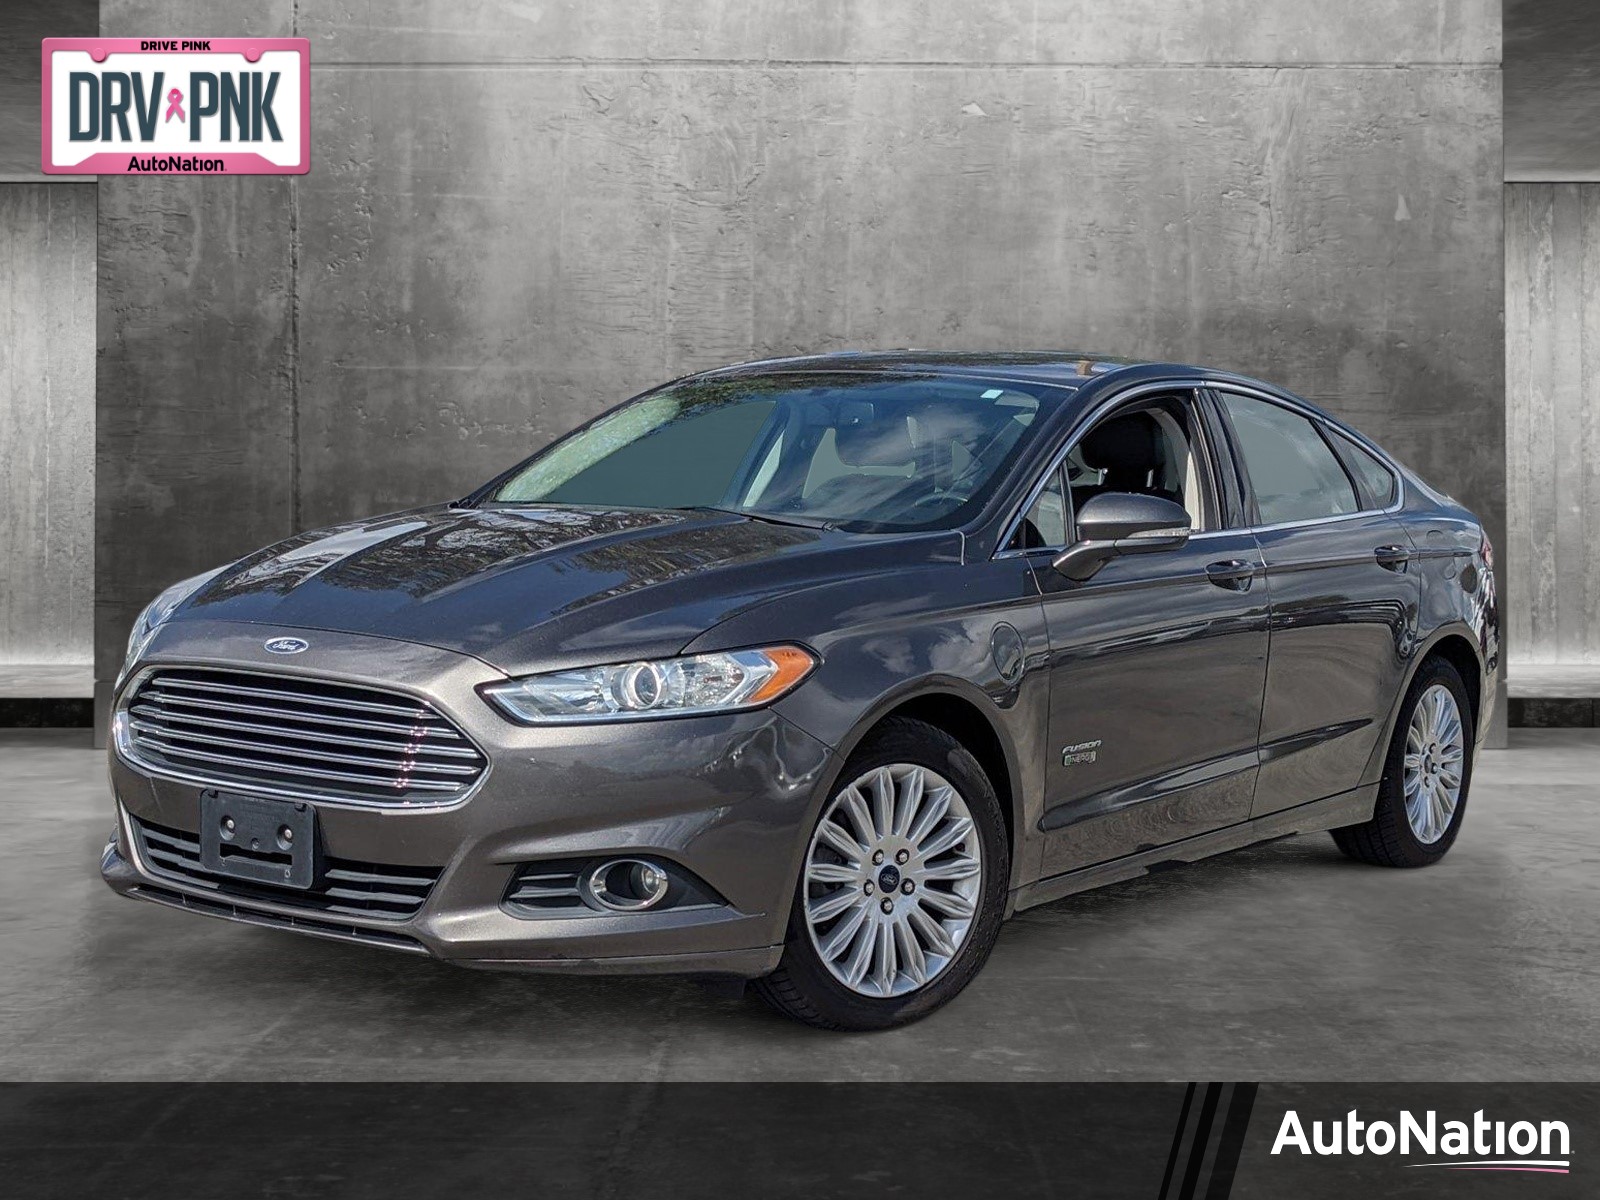 Pre-Owned 2016 Ford Fusion Energi SE Luxury 4dr Car in West Palm Beach  #GR322122 | Lexus of Palm Beach